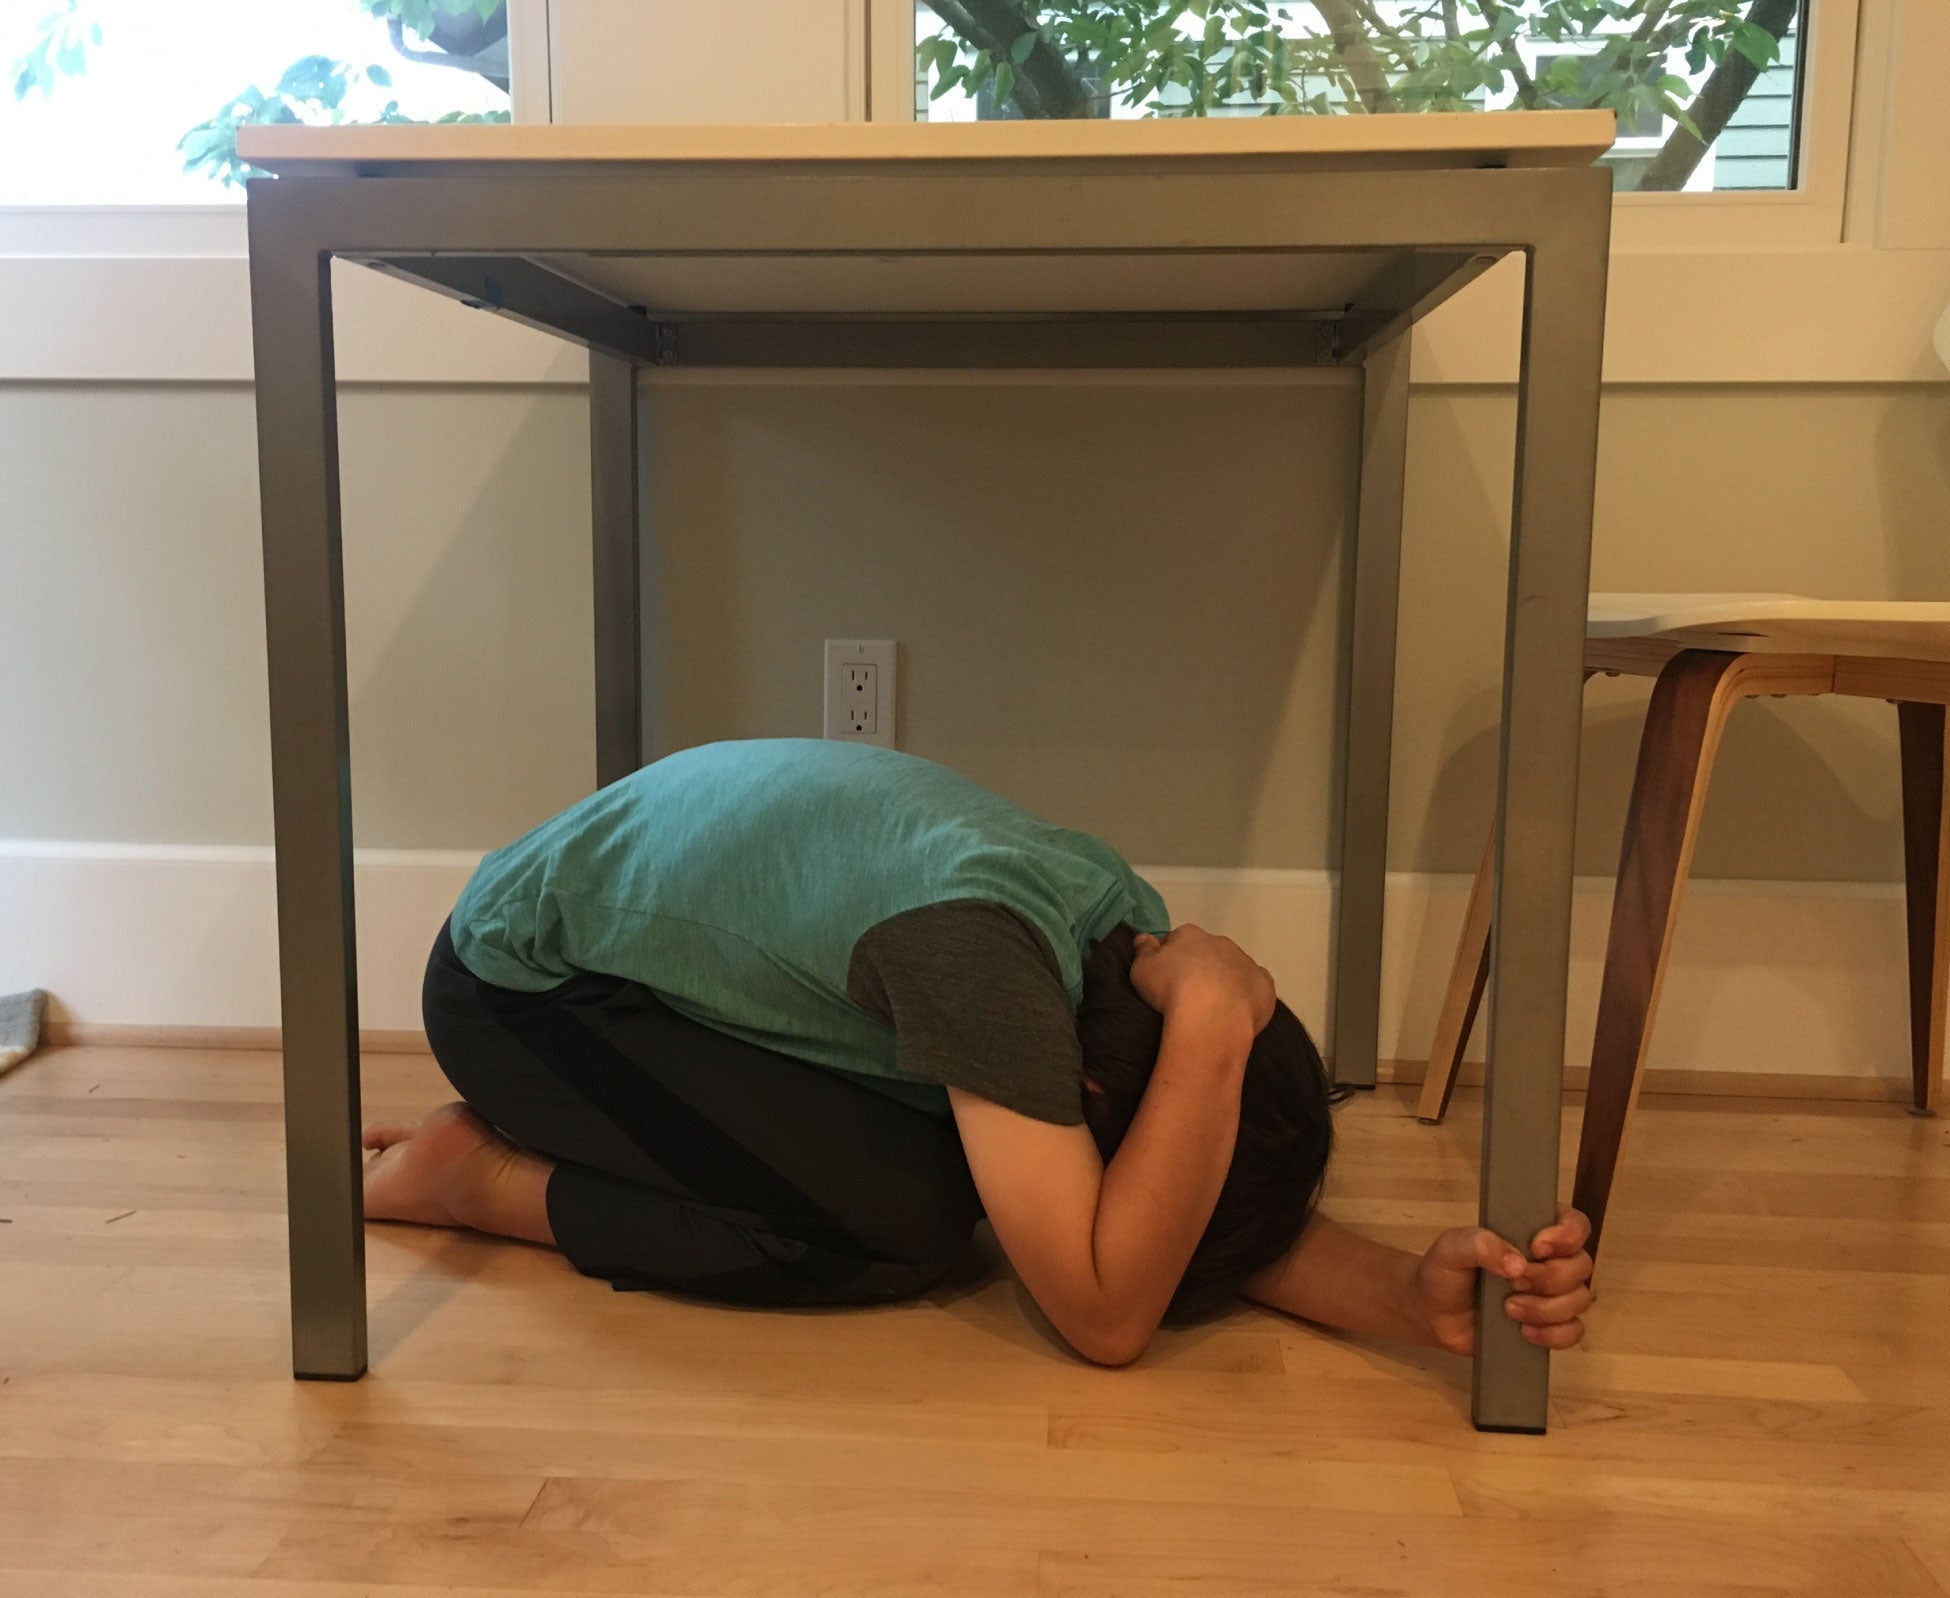 Ode to the Shakeout: Why I love earthquake drills